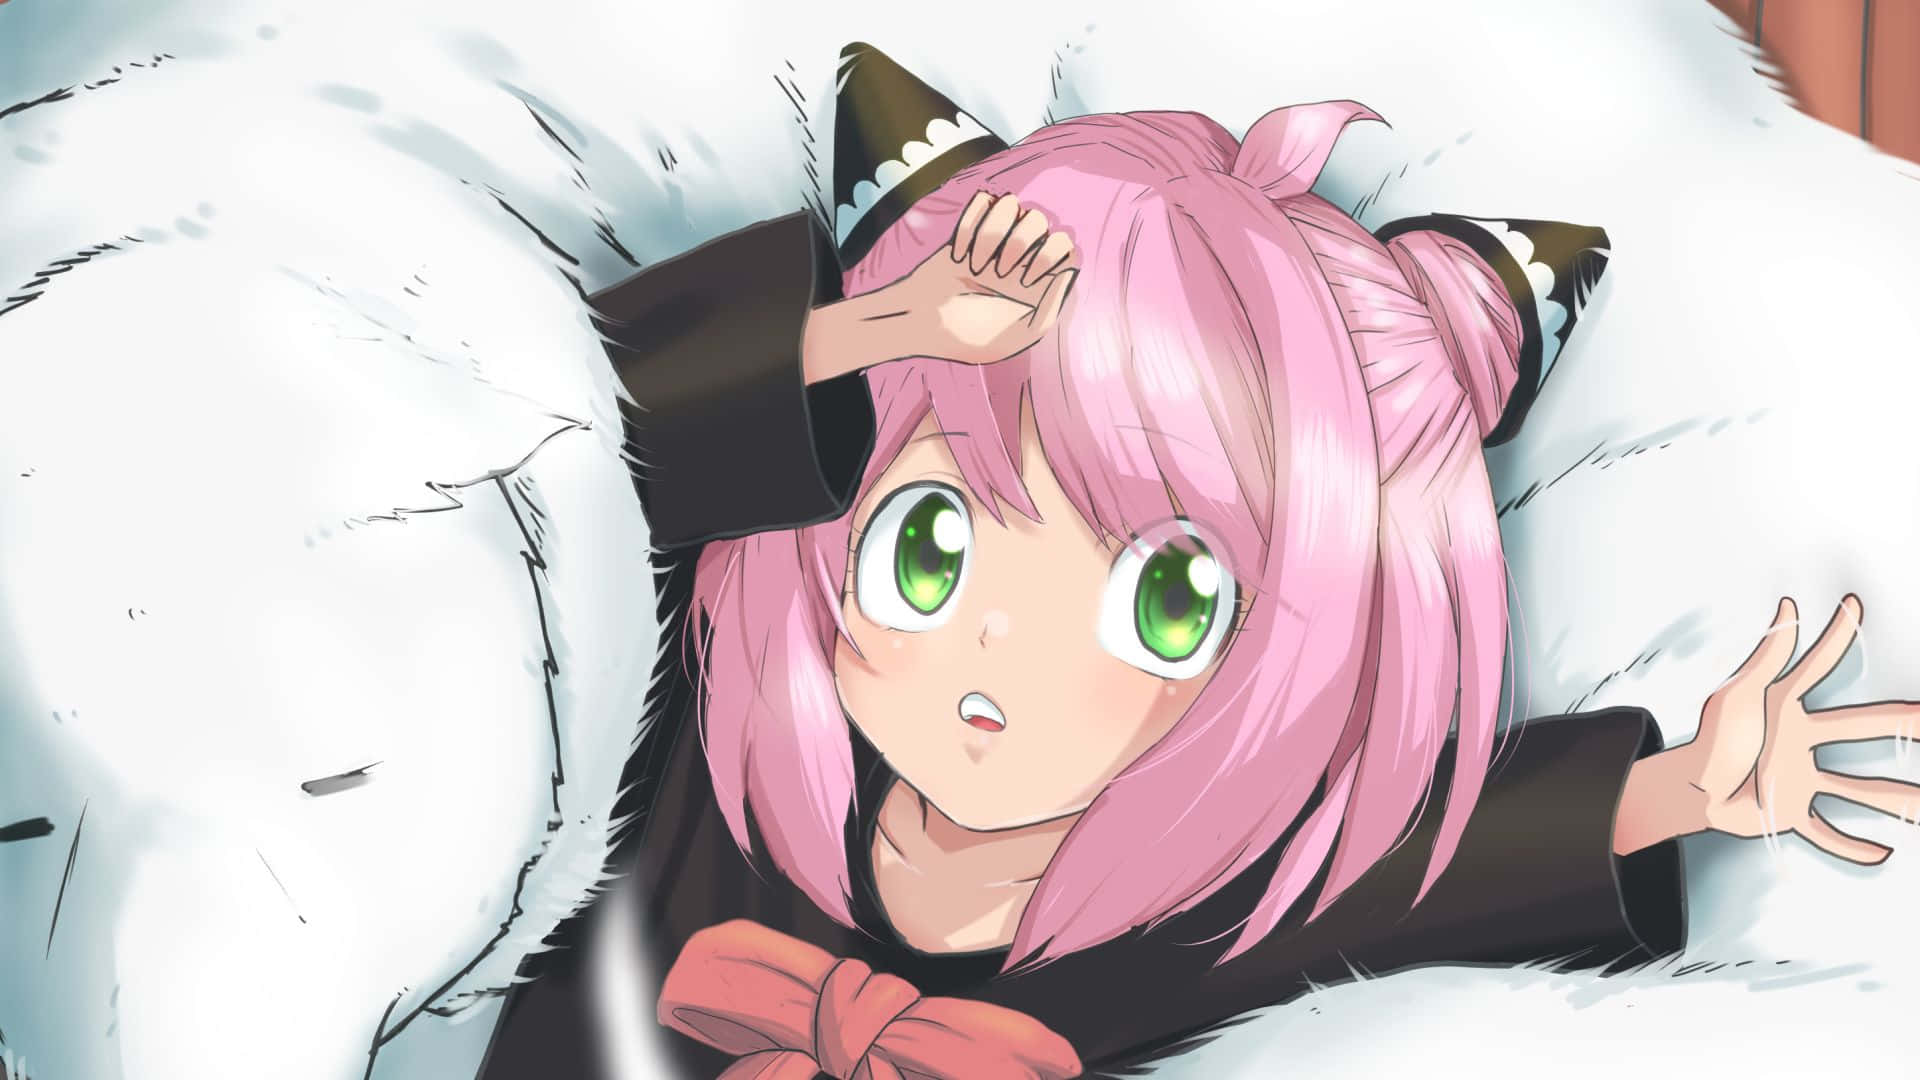 A Girl With Pink Hair Laying On A Furry Blanket Wallpaper